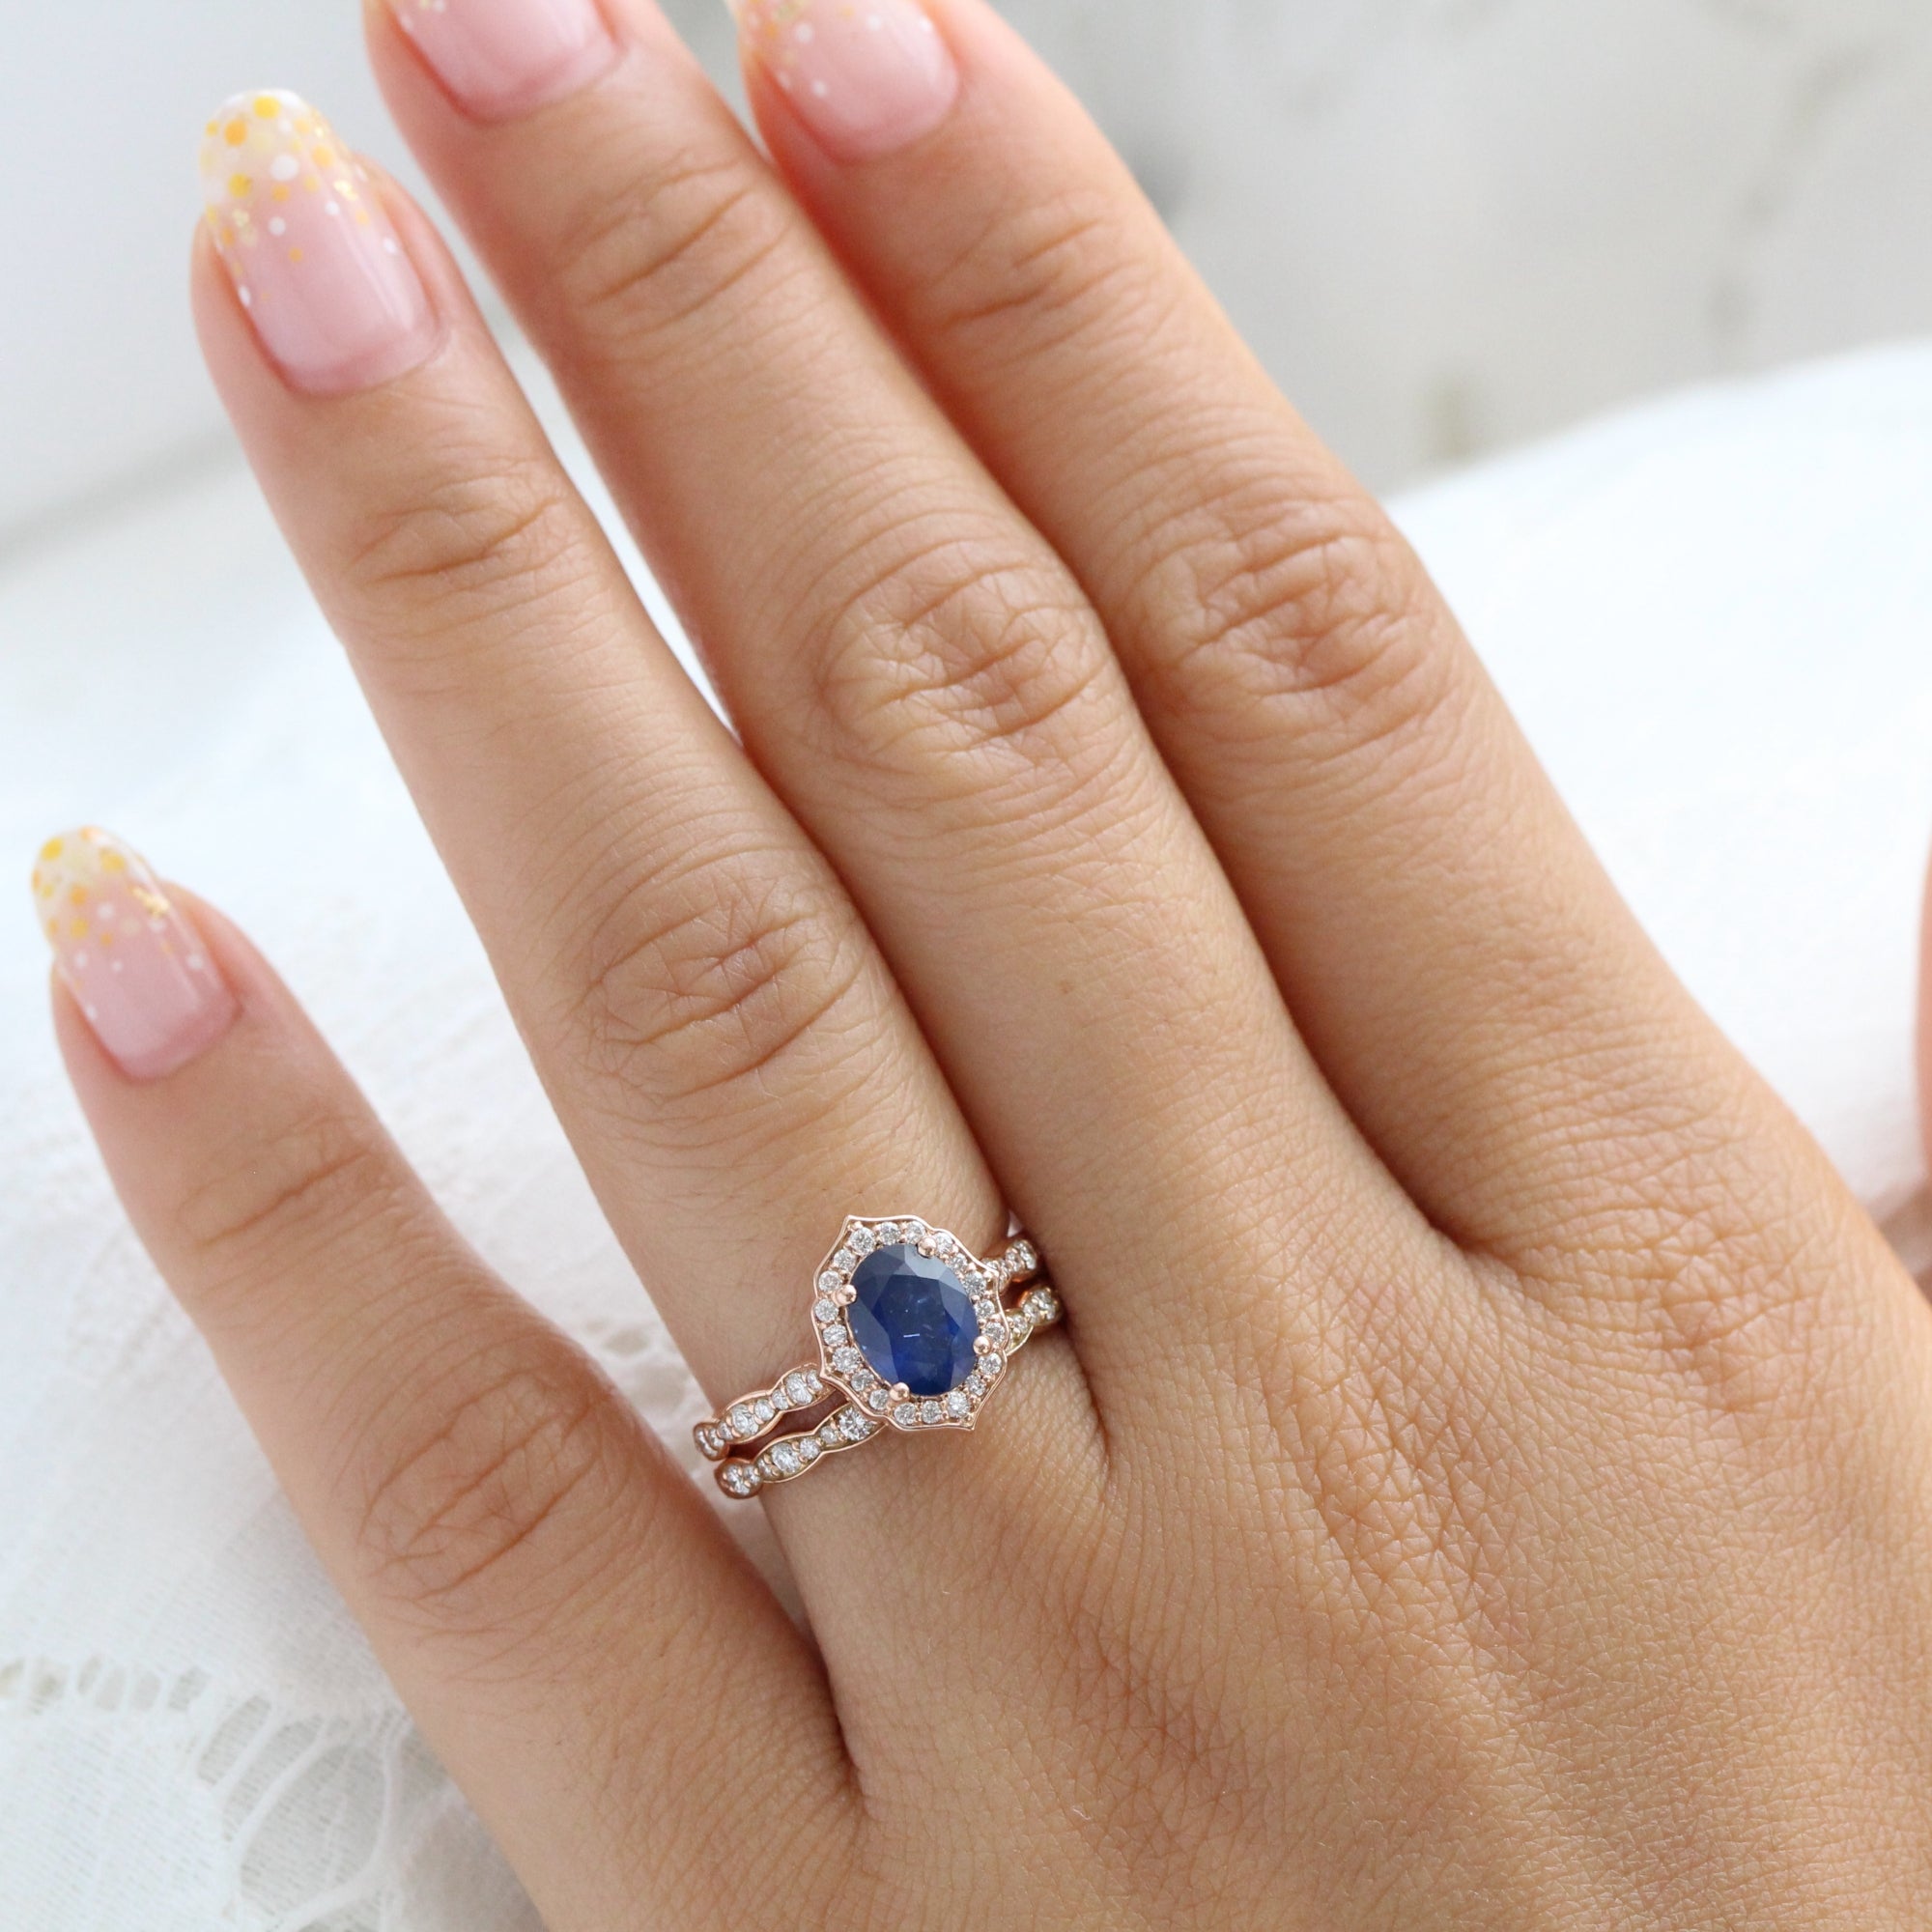 Vintage halo diamond sapphire engagement ring rose gold oval blue sapphire ring stack la more design jewelry